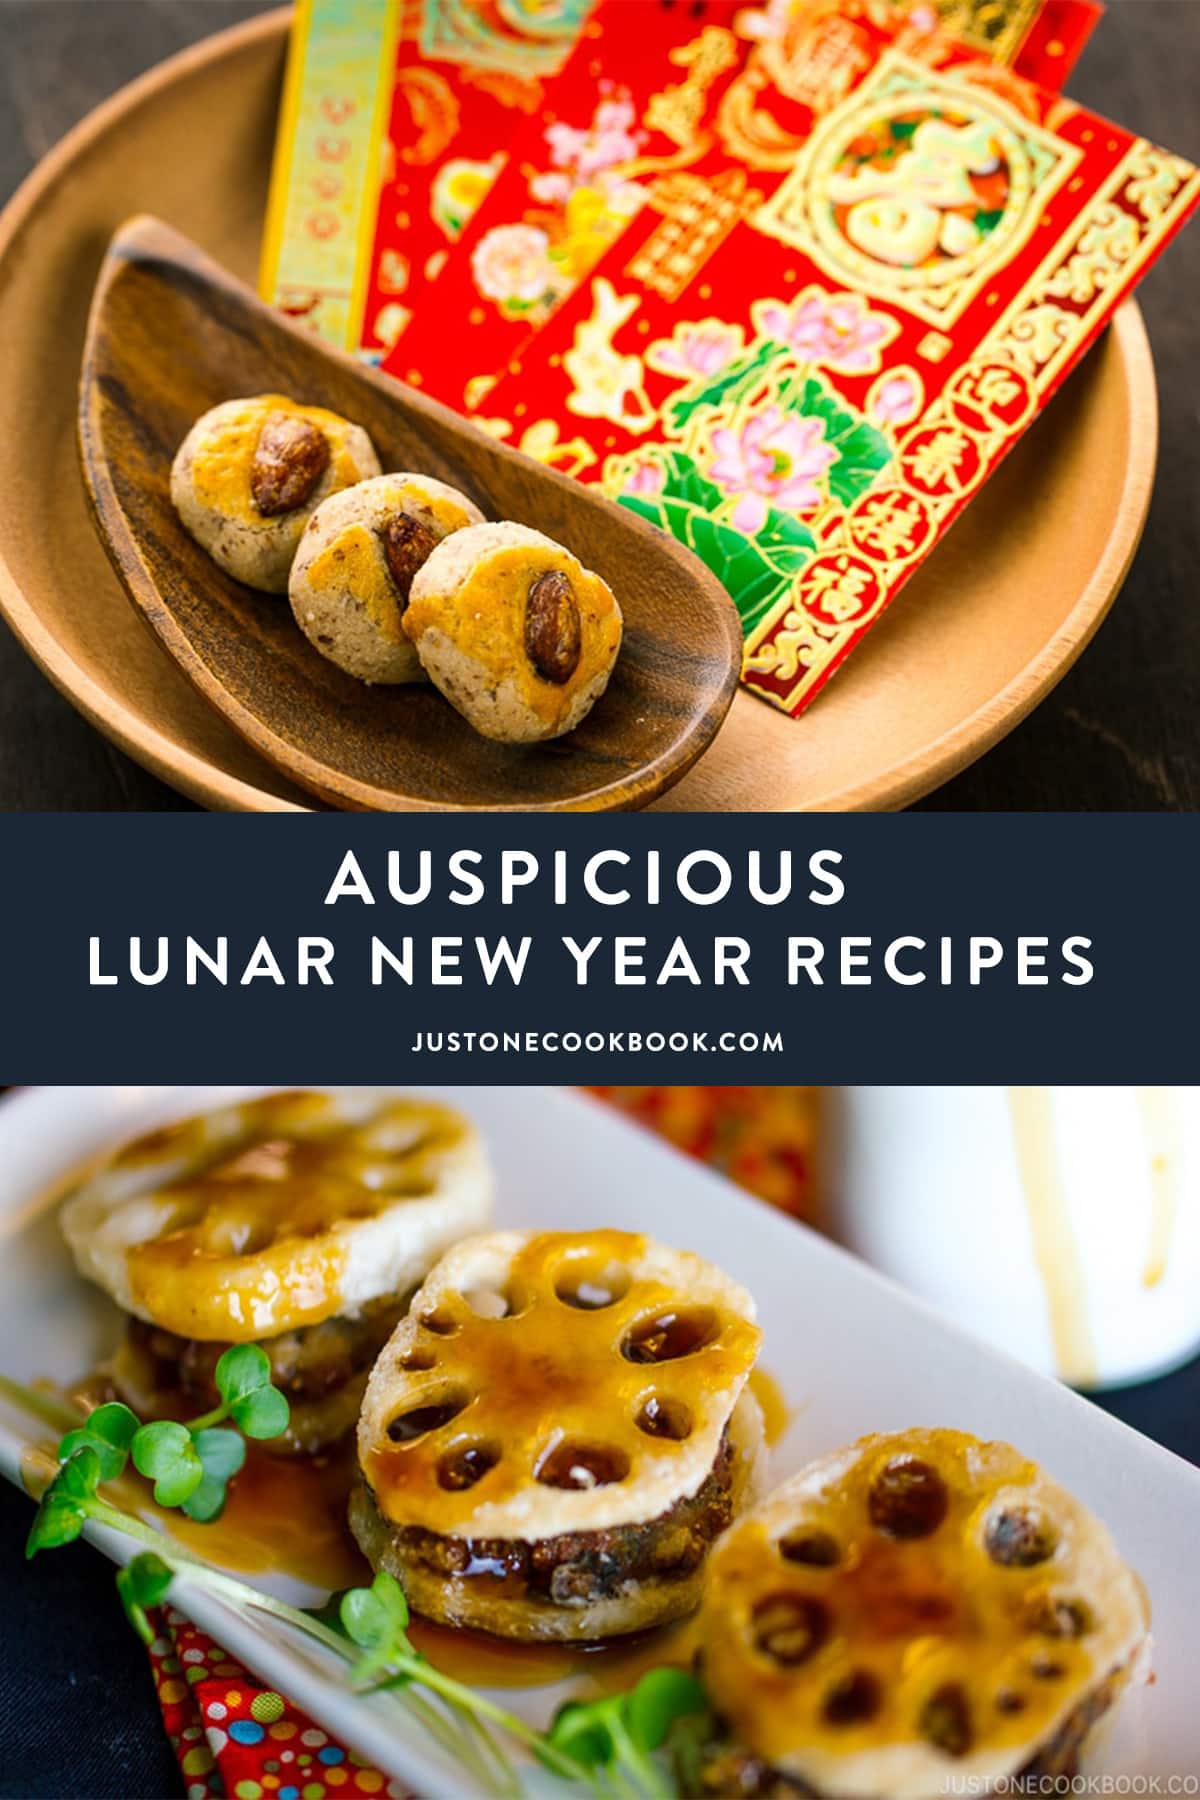 Collage of Chinese Almond Cookies and fried Lotus Root with pork for Lunar New Year